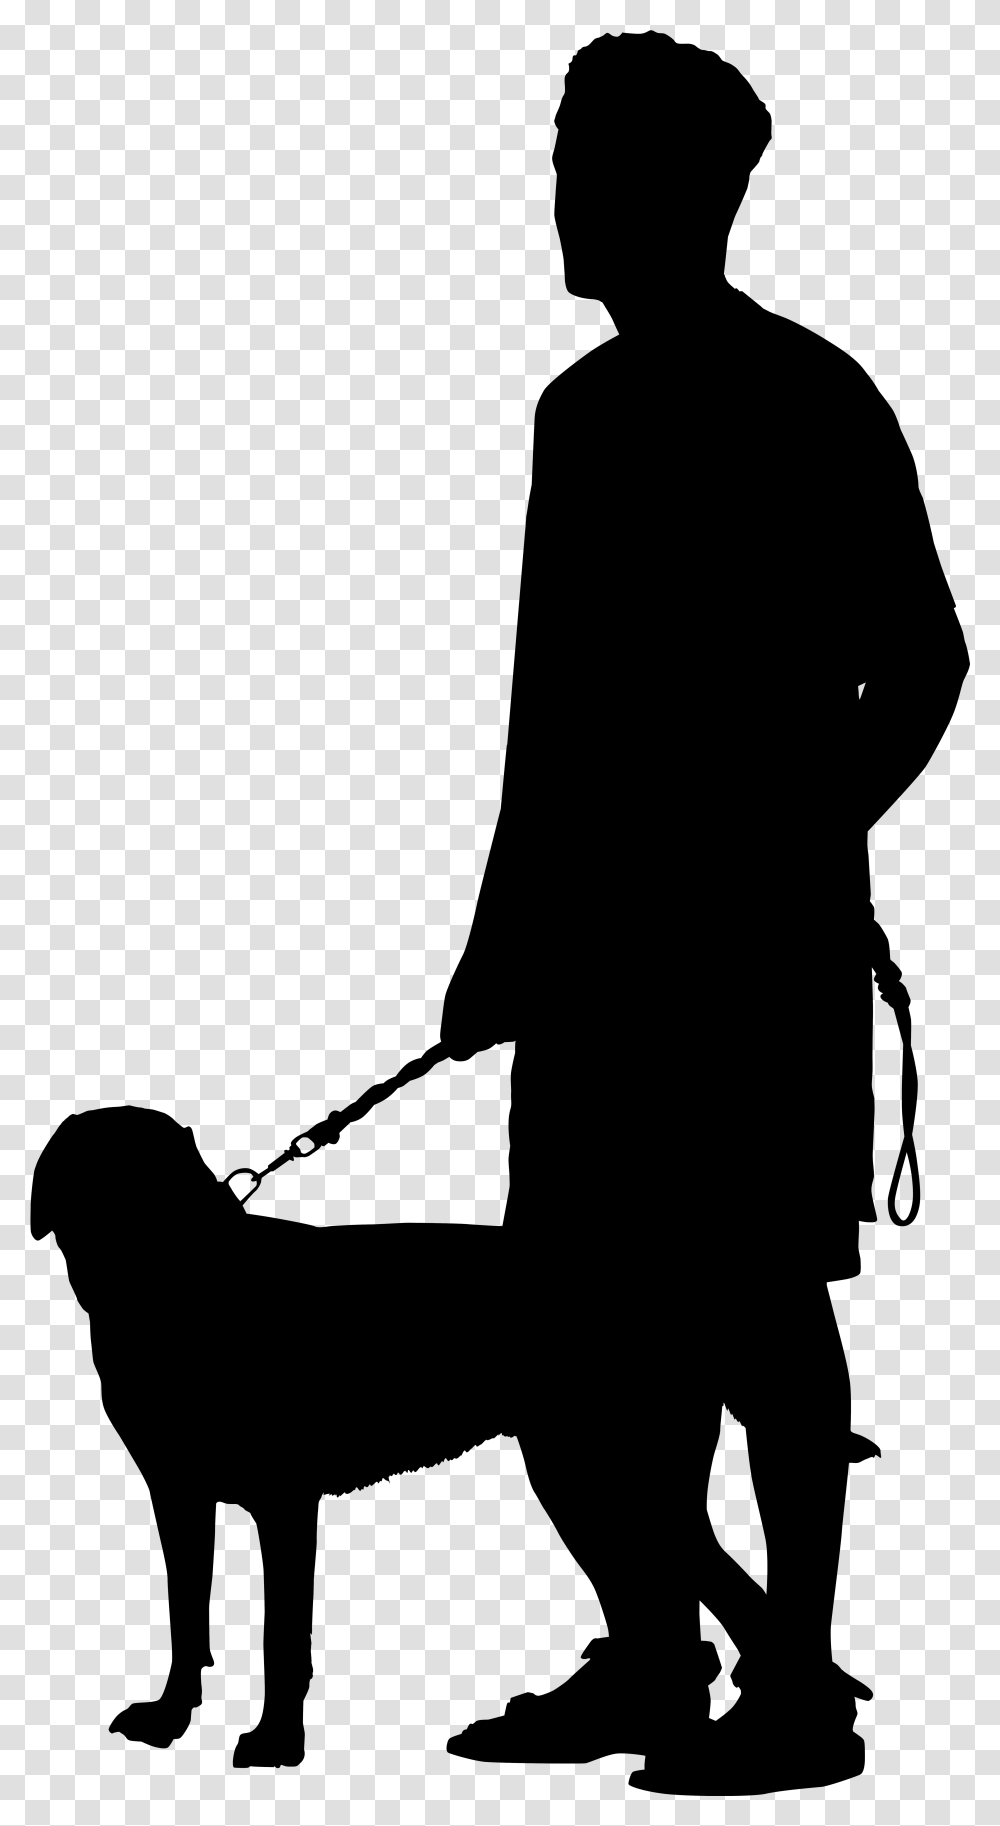 Clip Art Man Walking Away Silhouette Silhouette People Dog, Outdoors, Nature, Night, Outer Space Transparent Png